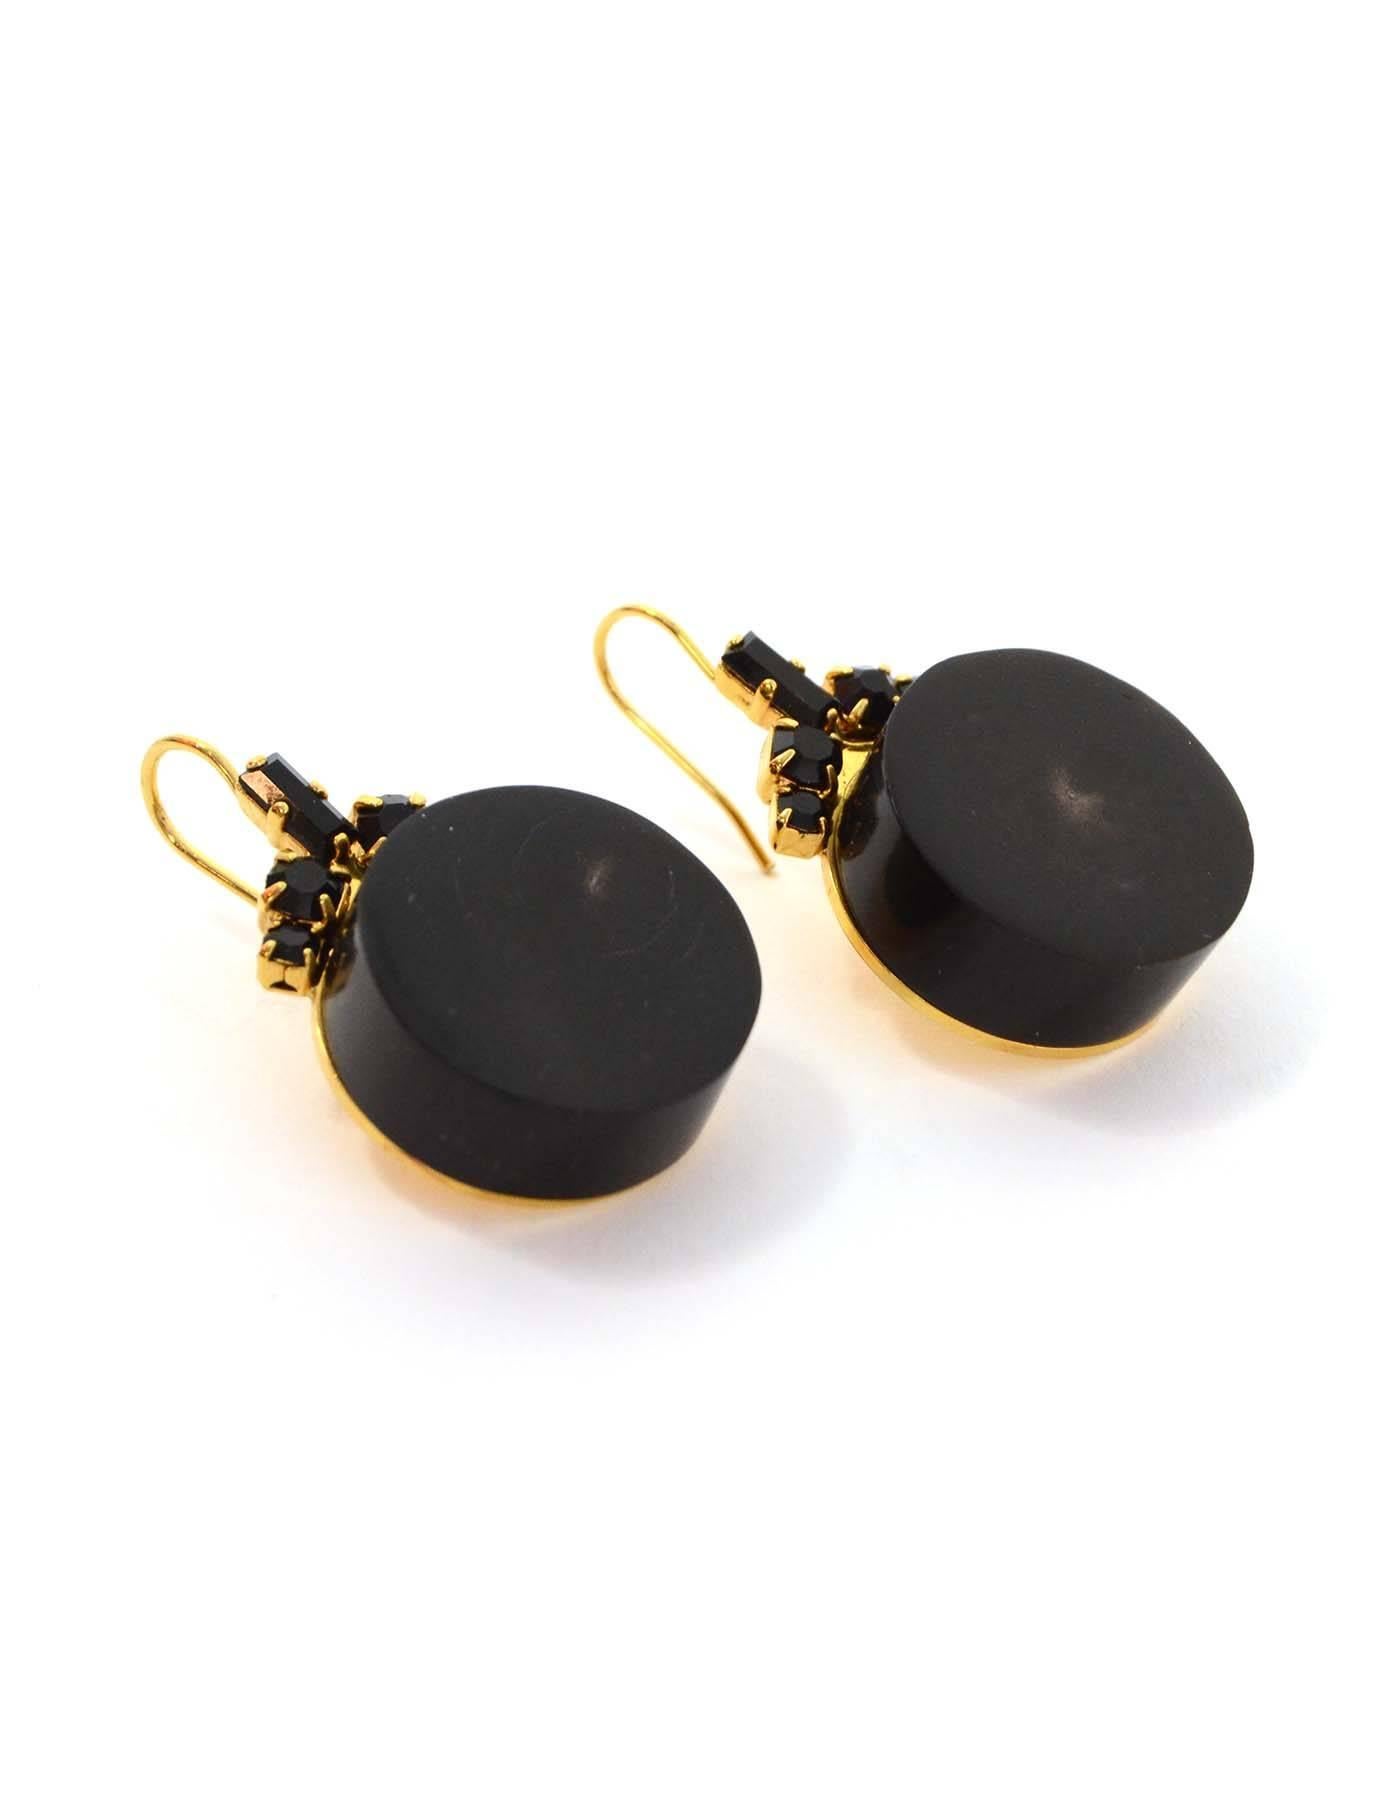 Marni Black & Gold Drop Earrings 
Features black baguette crystals at top with black wood-printed resin cylinders below

Color: Black
Hardware: Goldtone
Materials: Metal and resin
Closure: Pierced back hook- no closure
Stamp: Marni
Overall